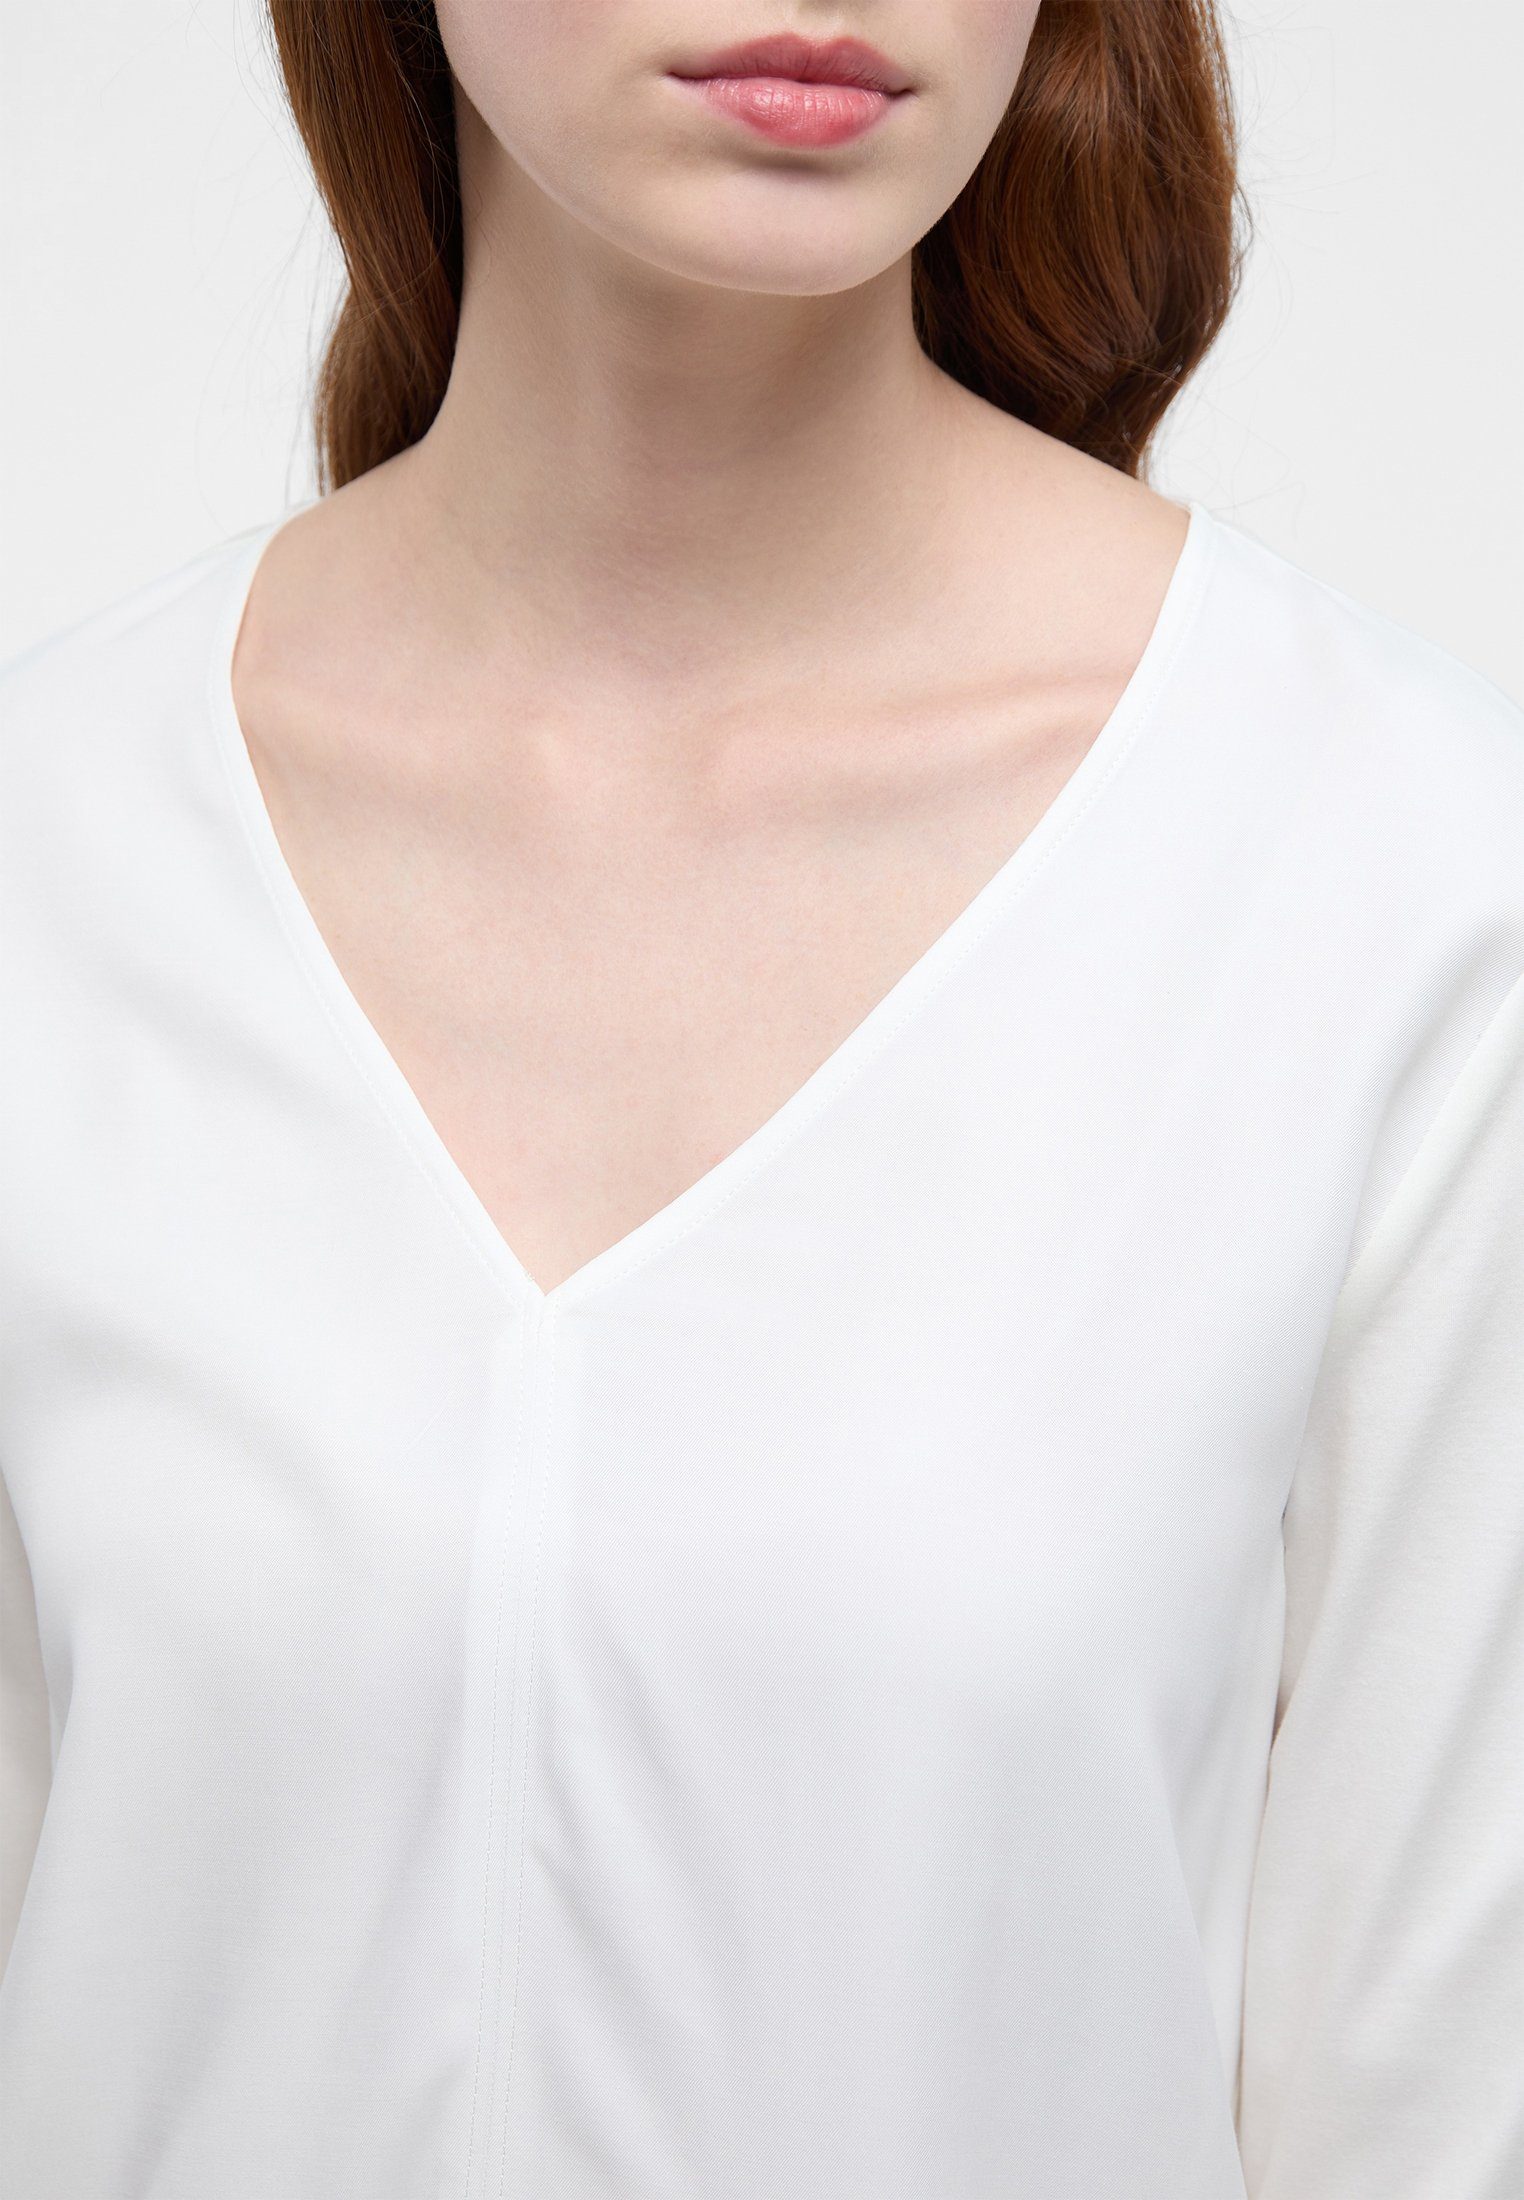 Eterna Shirtbluse LOOSE FIT off-white